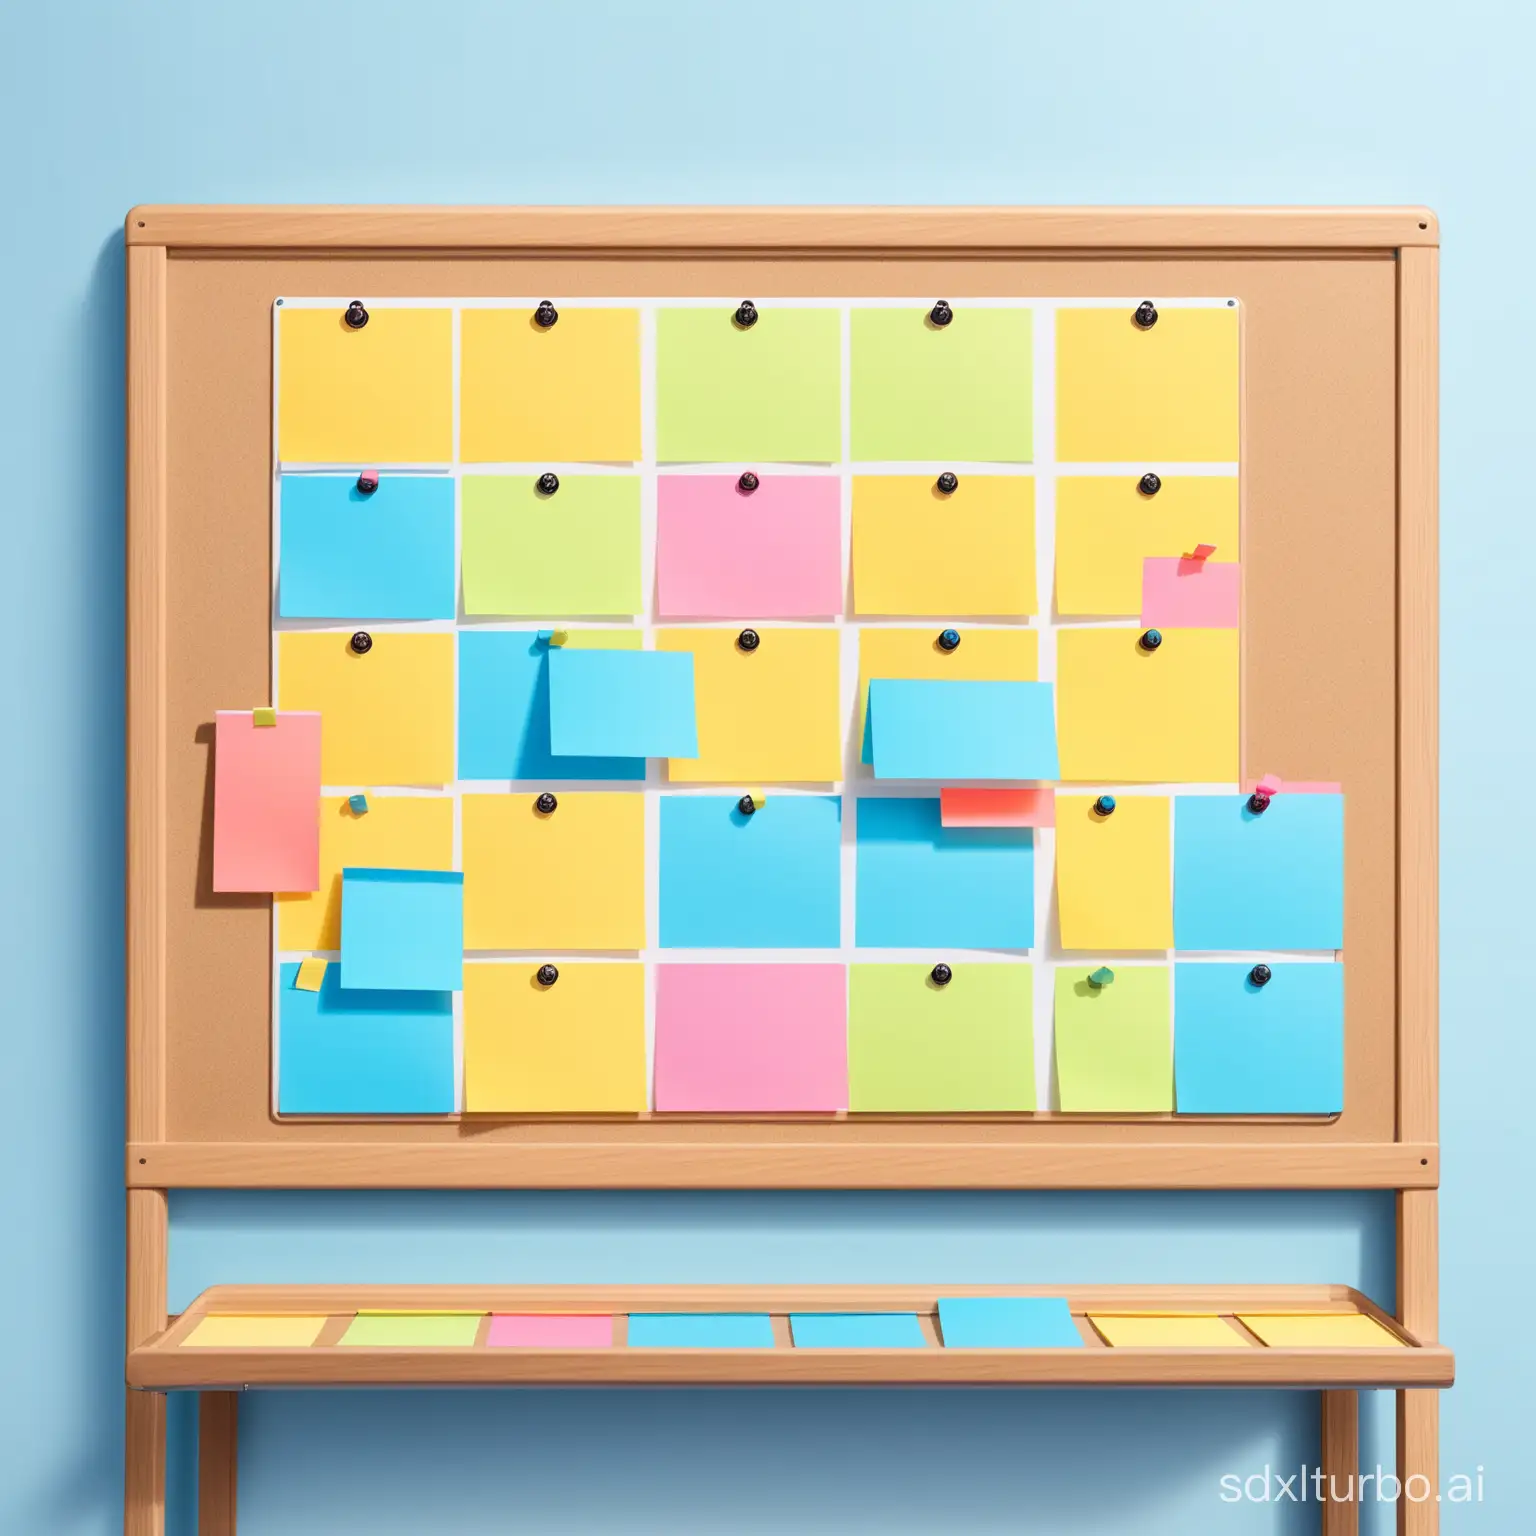 One whiteboard on wheels with a full on camera view. It has approximately 10 organized colourful blank sticky notes neatly placed in the center of the board in a grid-like fashion, the rest of the board is empty. The sticky notes are coloured pale azure, chefchaouen blue, light yellow, and coral. No push pins, no magnets and no cork bulletin board